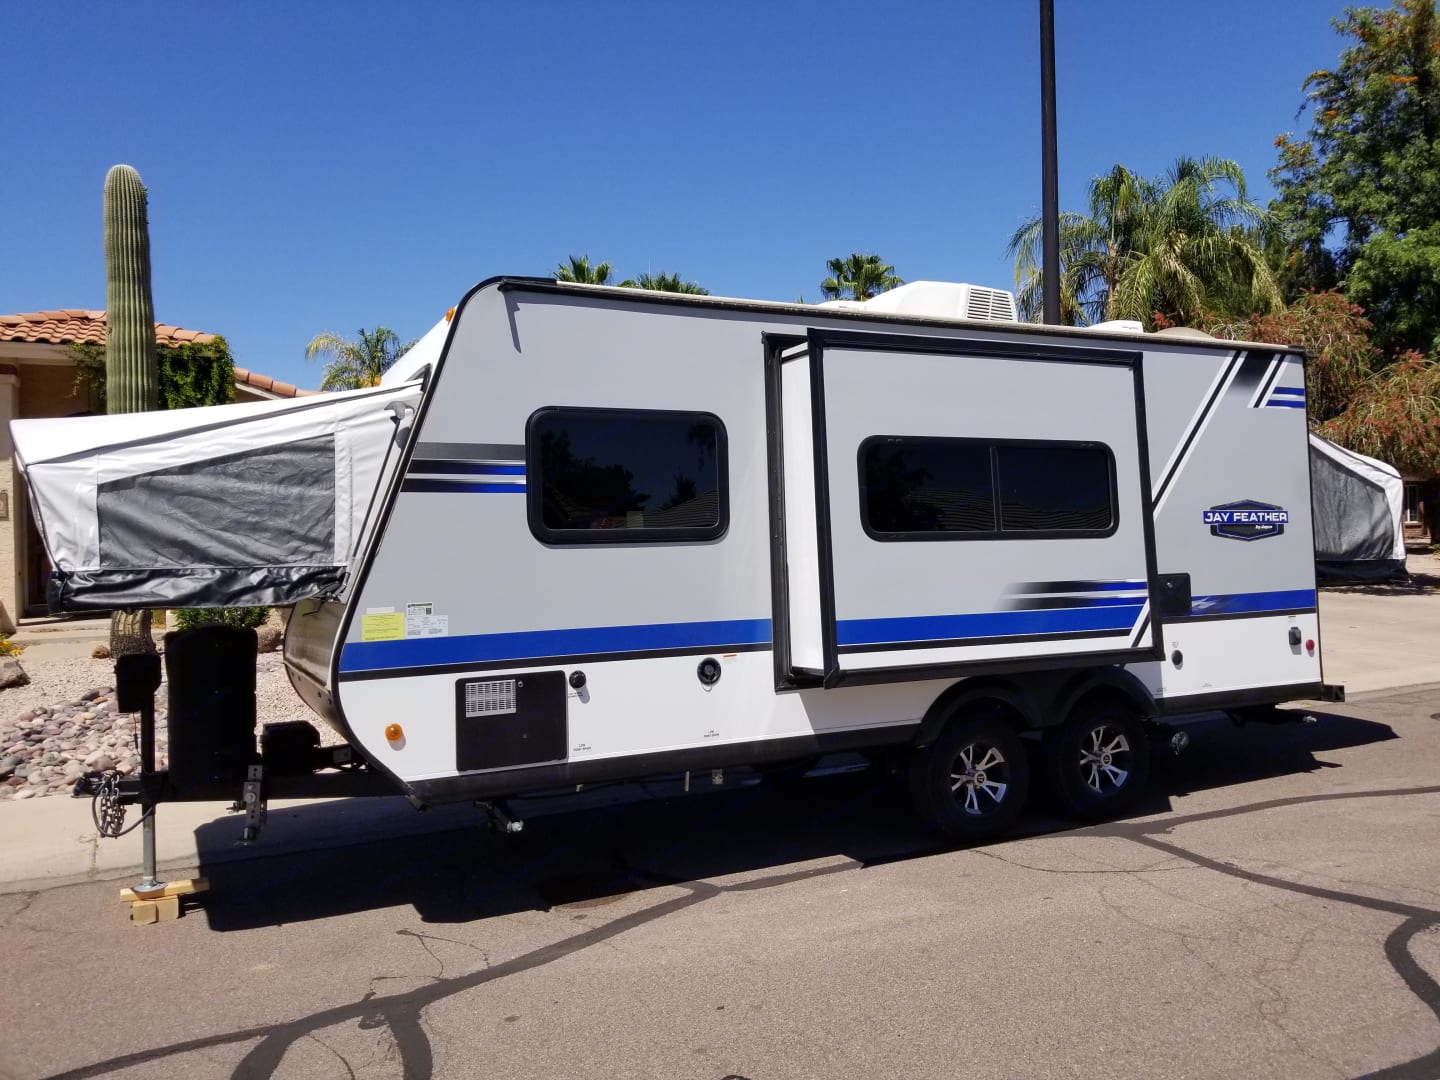 Jay feather camper for rent